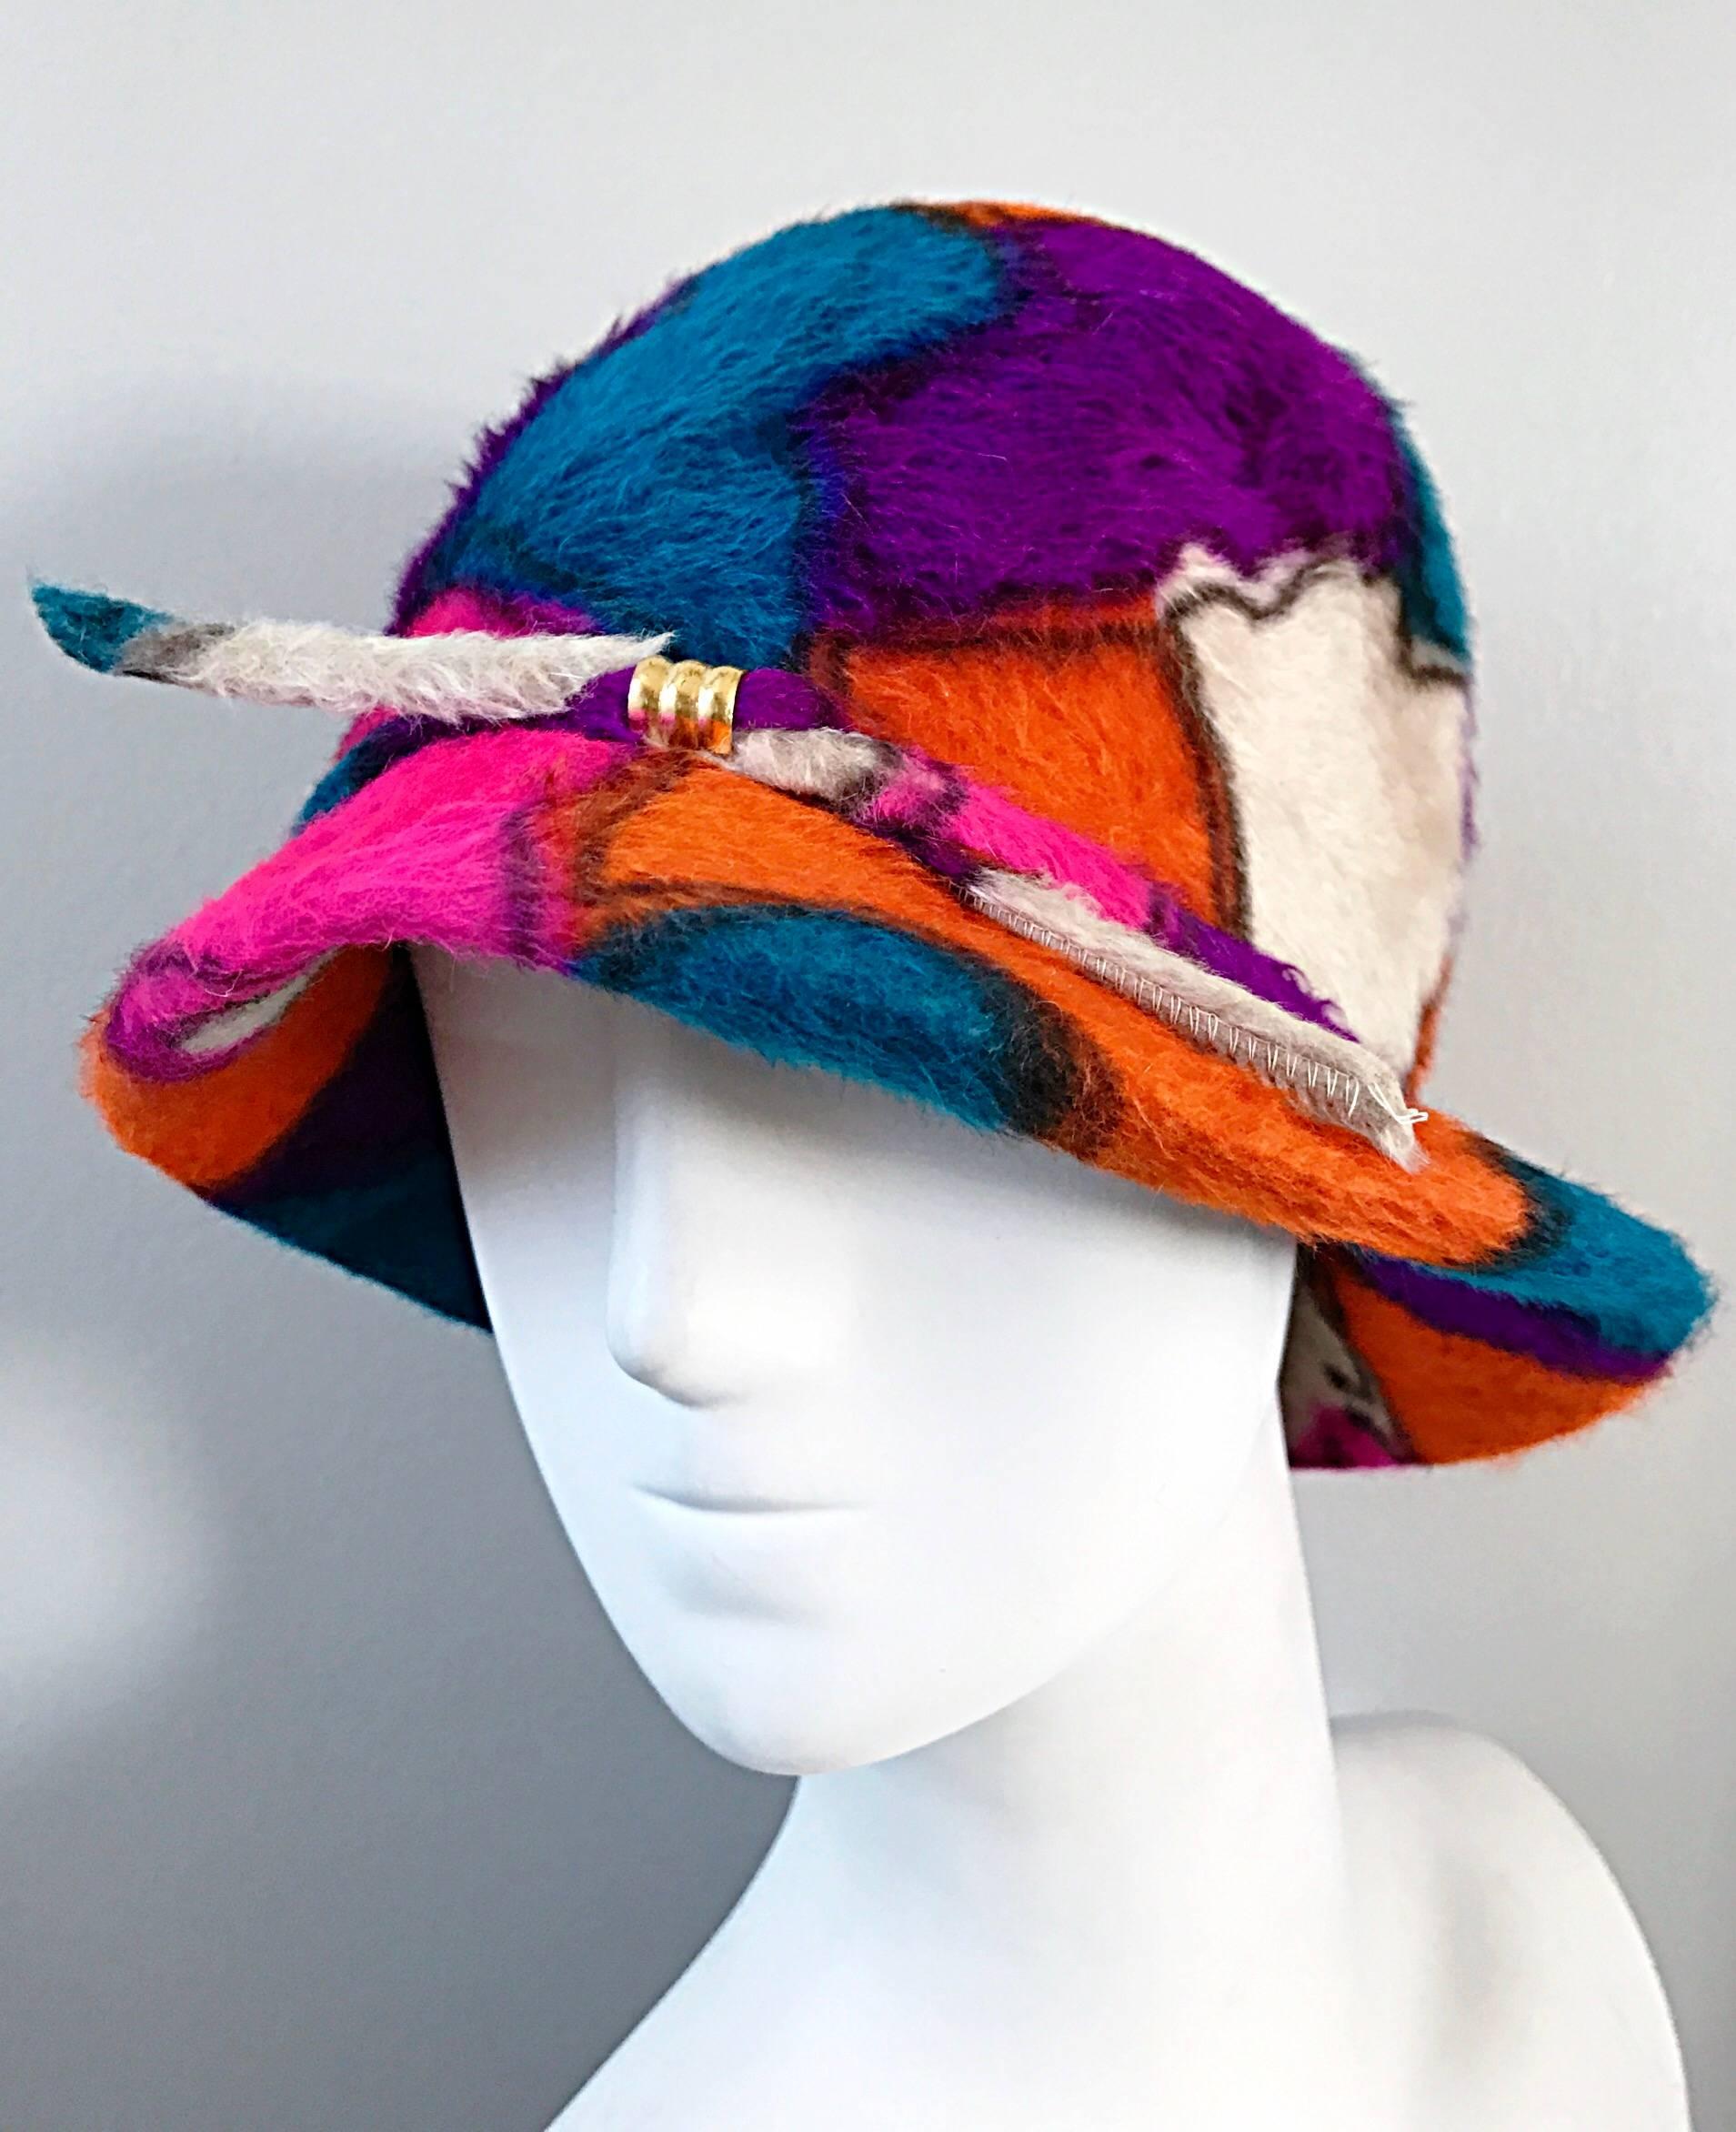 Rare 1960s YVES SAINT LAURENT color block abstract printed cloche hat! Features vibrant hues of purple, orange, fuchsia pink, blue and ivory throughout. Band across the entire hat, with a center gold loop. Looks amazing on! Great with jeans, a